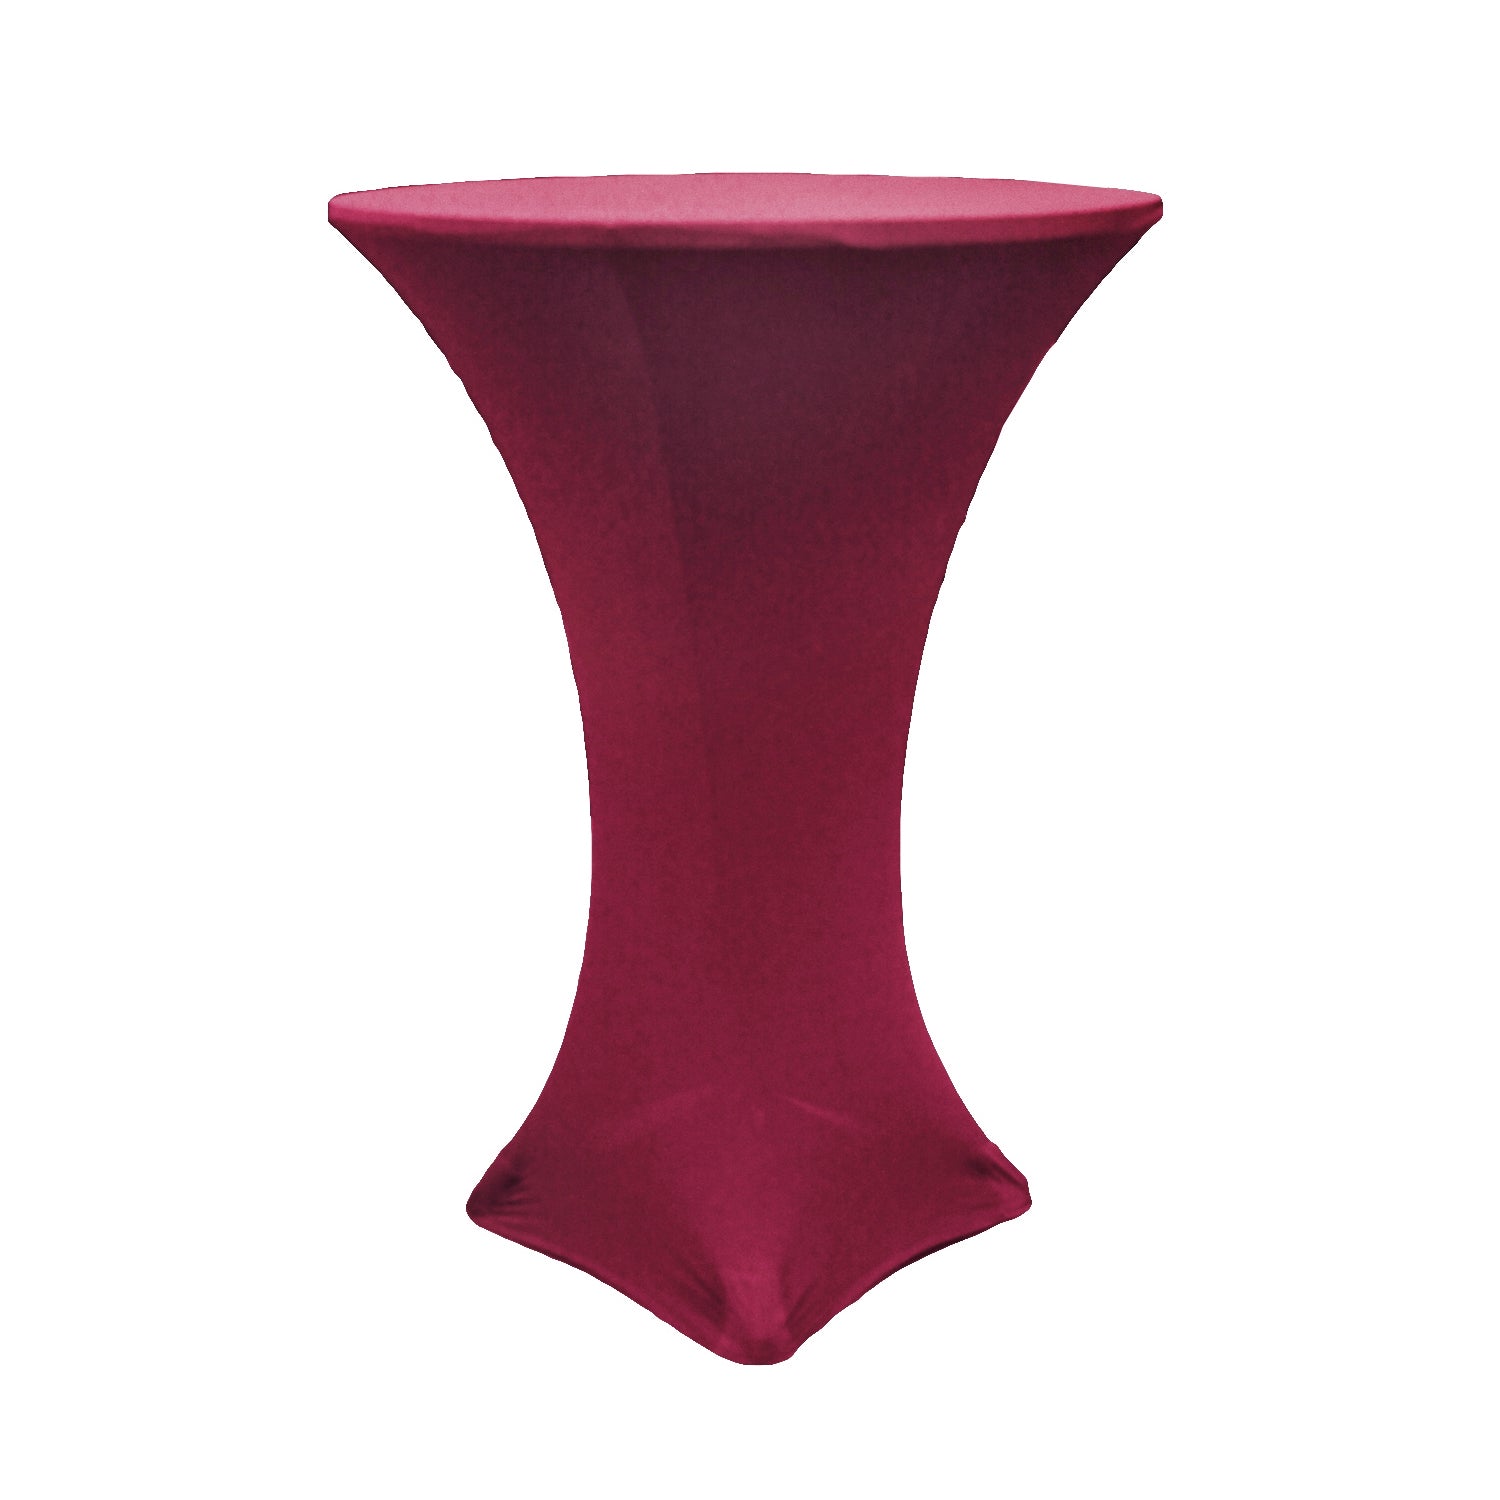 Spandex Cocktail Table Cover 30" Round - Burgundy - CV Linens